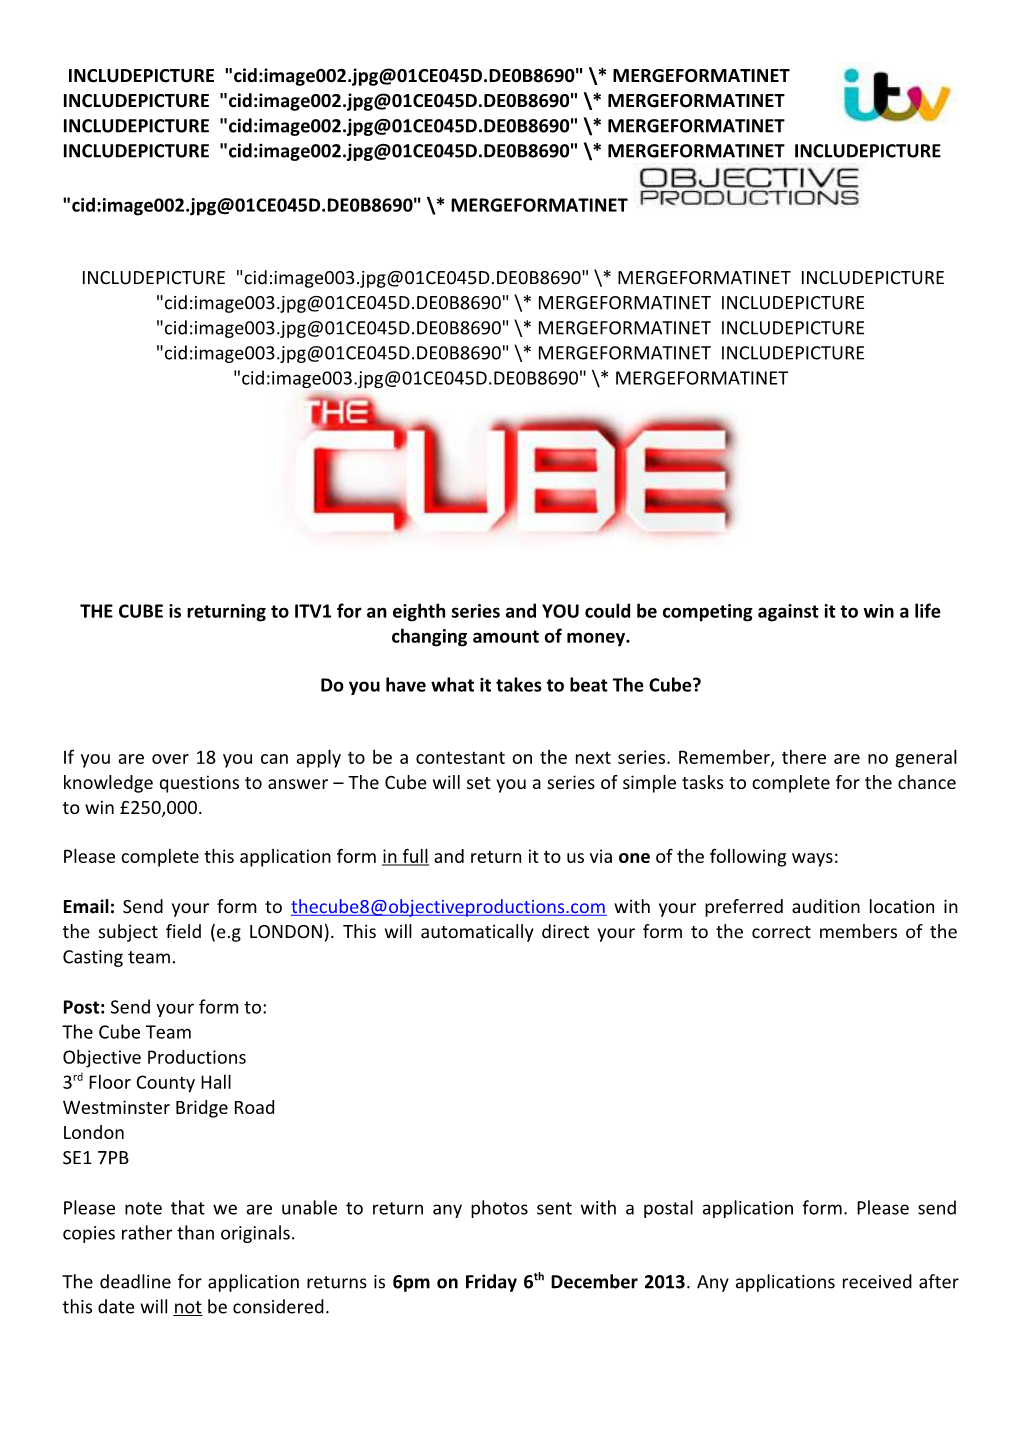 The Cube Application Form